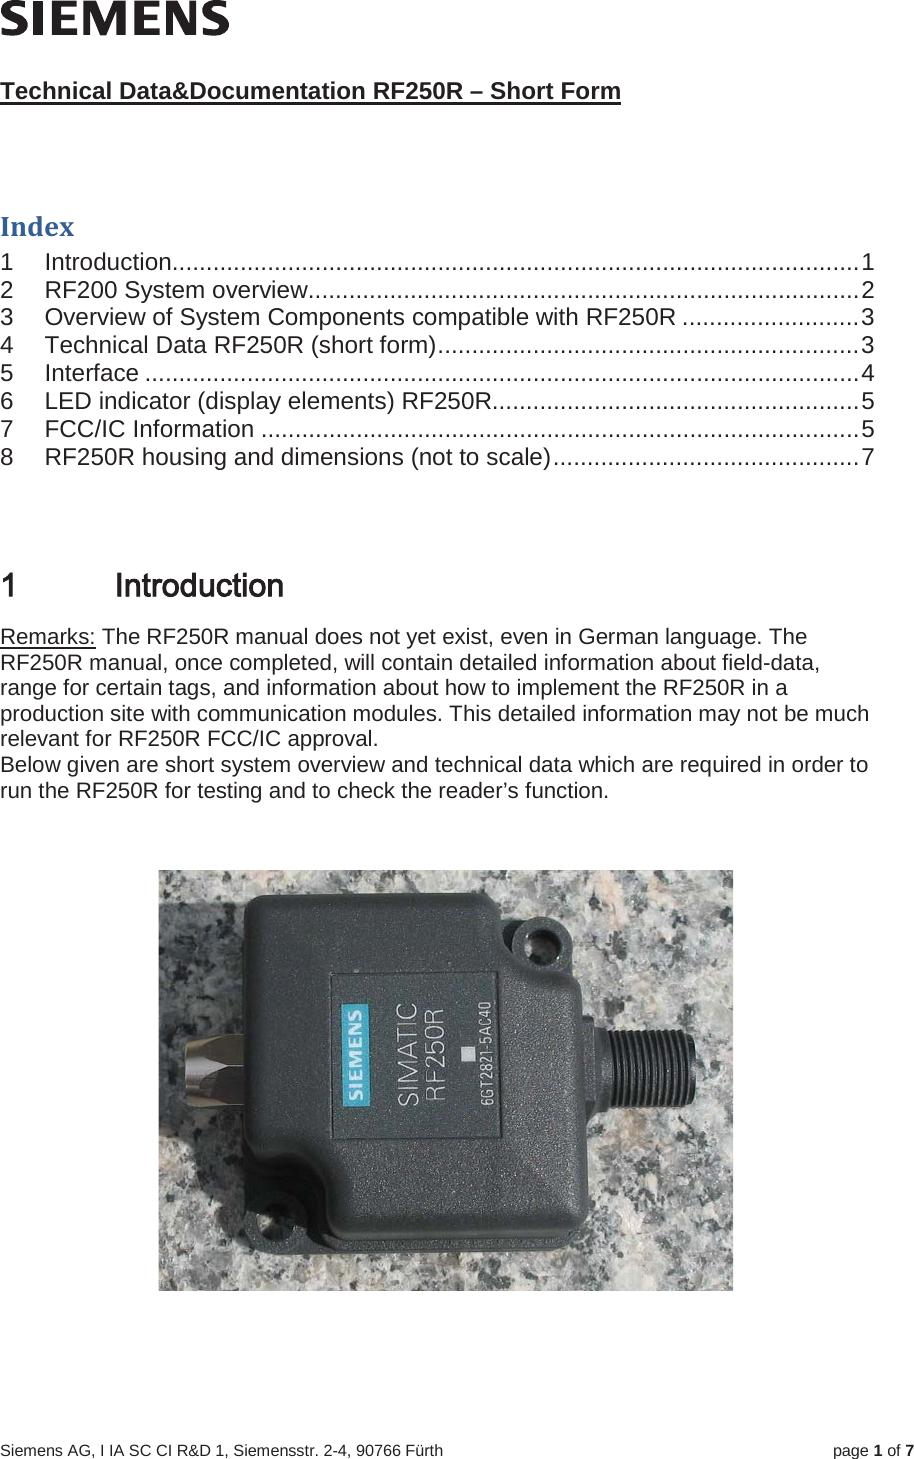 Siemens AG, I IA SC CI R&amp;D 1, Siemensstr. 2-4, 90766 Fürth page 1of 7Technical Data&amp;Documentation RF250R – Short FormIndex 1 Introduction.....................................................................................................12 RF200 System overview.................................................................................23 Overview of System Components compatible with RF250R ..........................34 Technical Data RF250R (short form)..............................................................35 Interface .........................................................................................................46 LED indicator (display elements) RF250R......................................................57 FCC/IC Information ........................................................................................58 RF250R housing and dimensions (not to scale).............................................7,QWURGXFWLRQRemarks: The RF250R manual does not yet exist, even in German language. The RF250R manual, once completed, will contain detailed information about field-data, range for certain tags, and information about how to implement the RF250R in a production site with communication modules. This detailed information may not be much relevant for RF250R FCC/IC approval.Below given are short system overview and technical data which are required in order to run the RF250R for testing and to check the reader’s function.